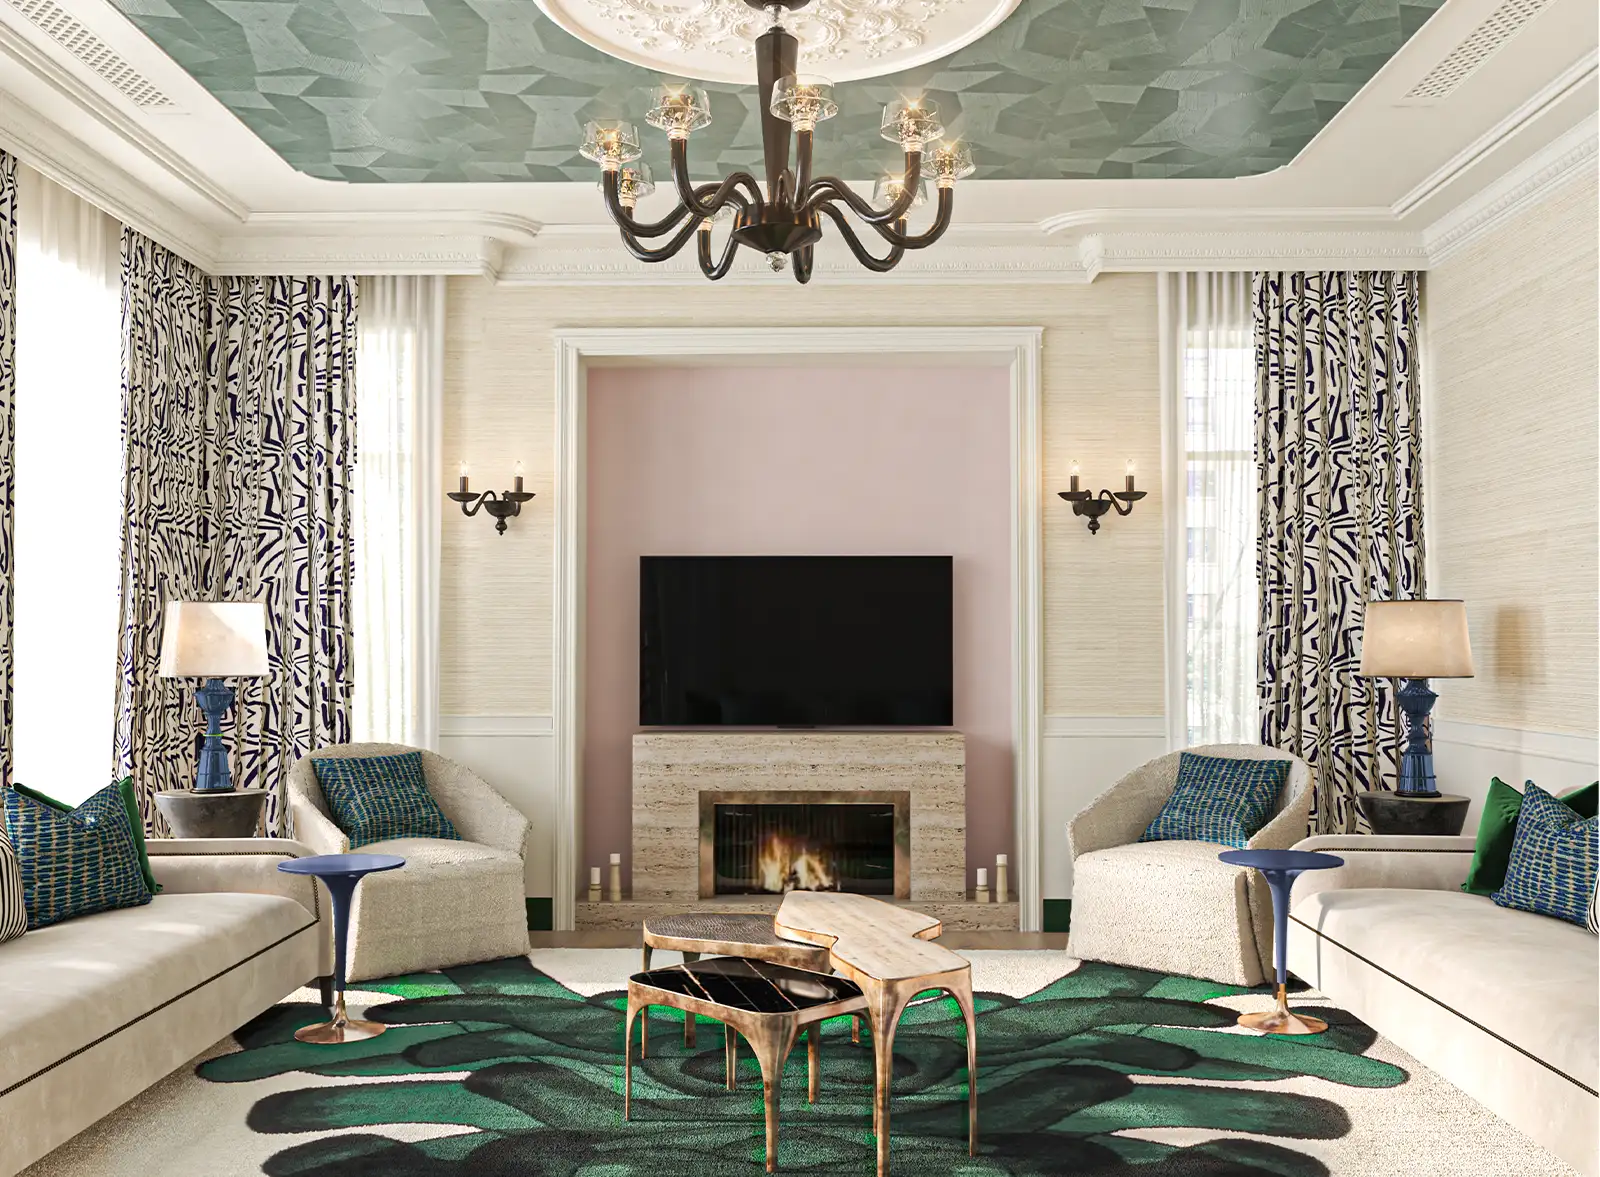 Elegant living room interior design with a pale pink fireplace, sophisticated geometric ceiling art, classic chandelier, patterned curtains, and a statement green leafy rug, complemented by plush seating and stylish side tables